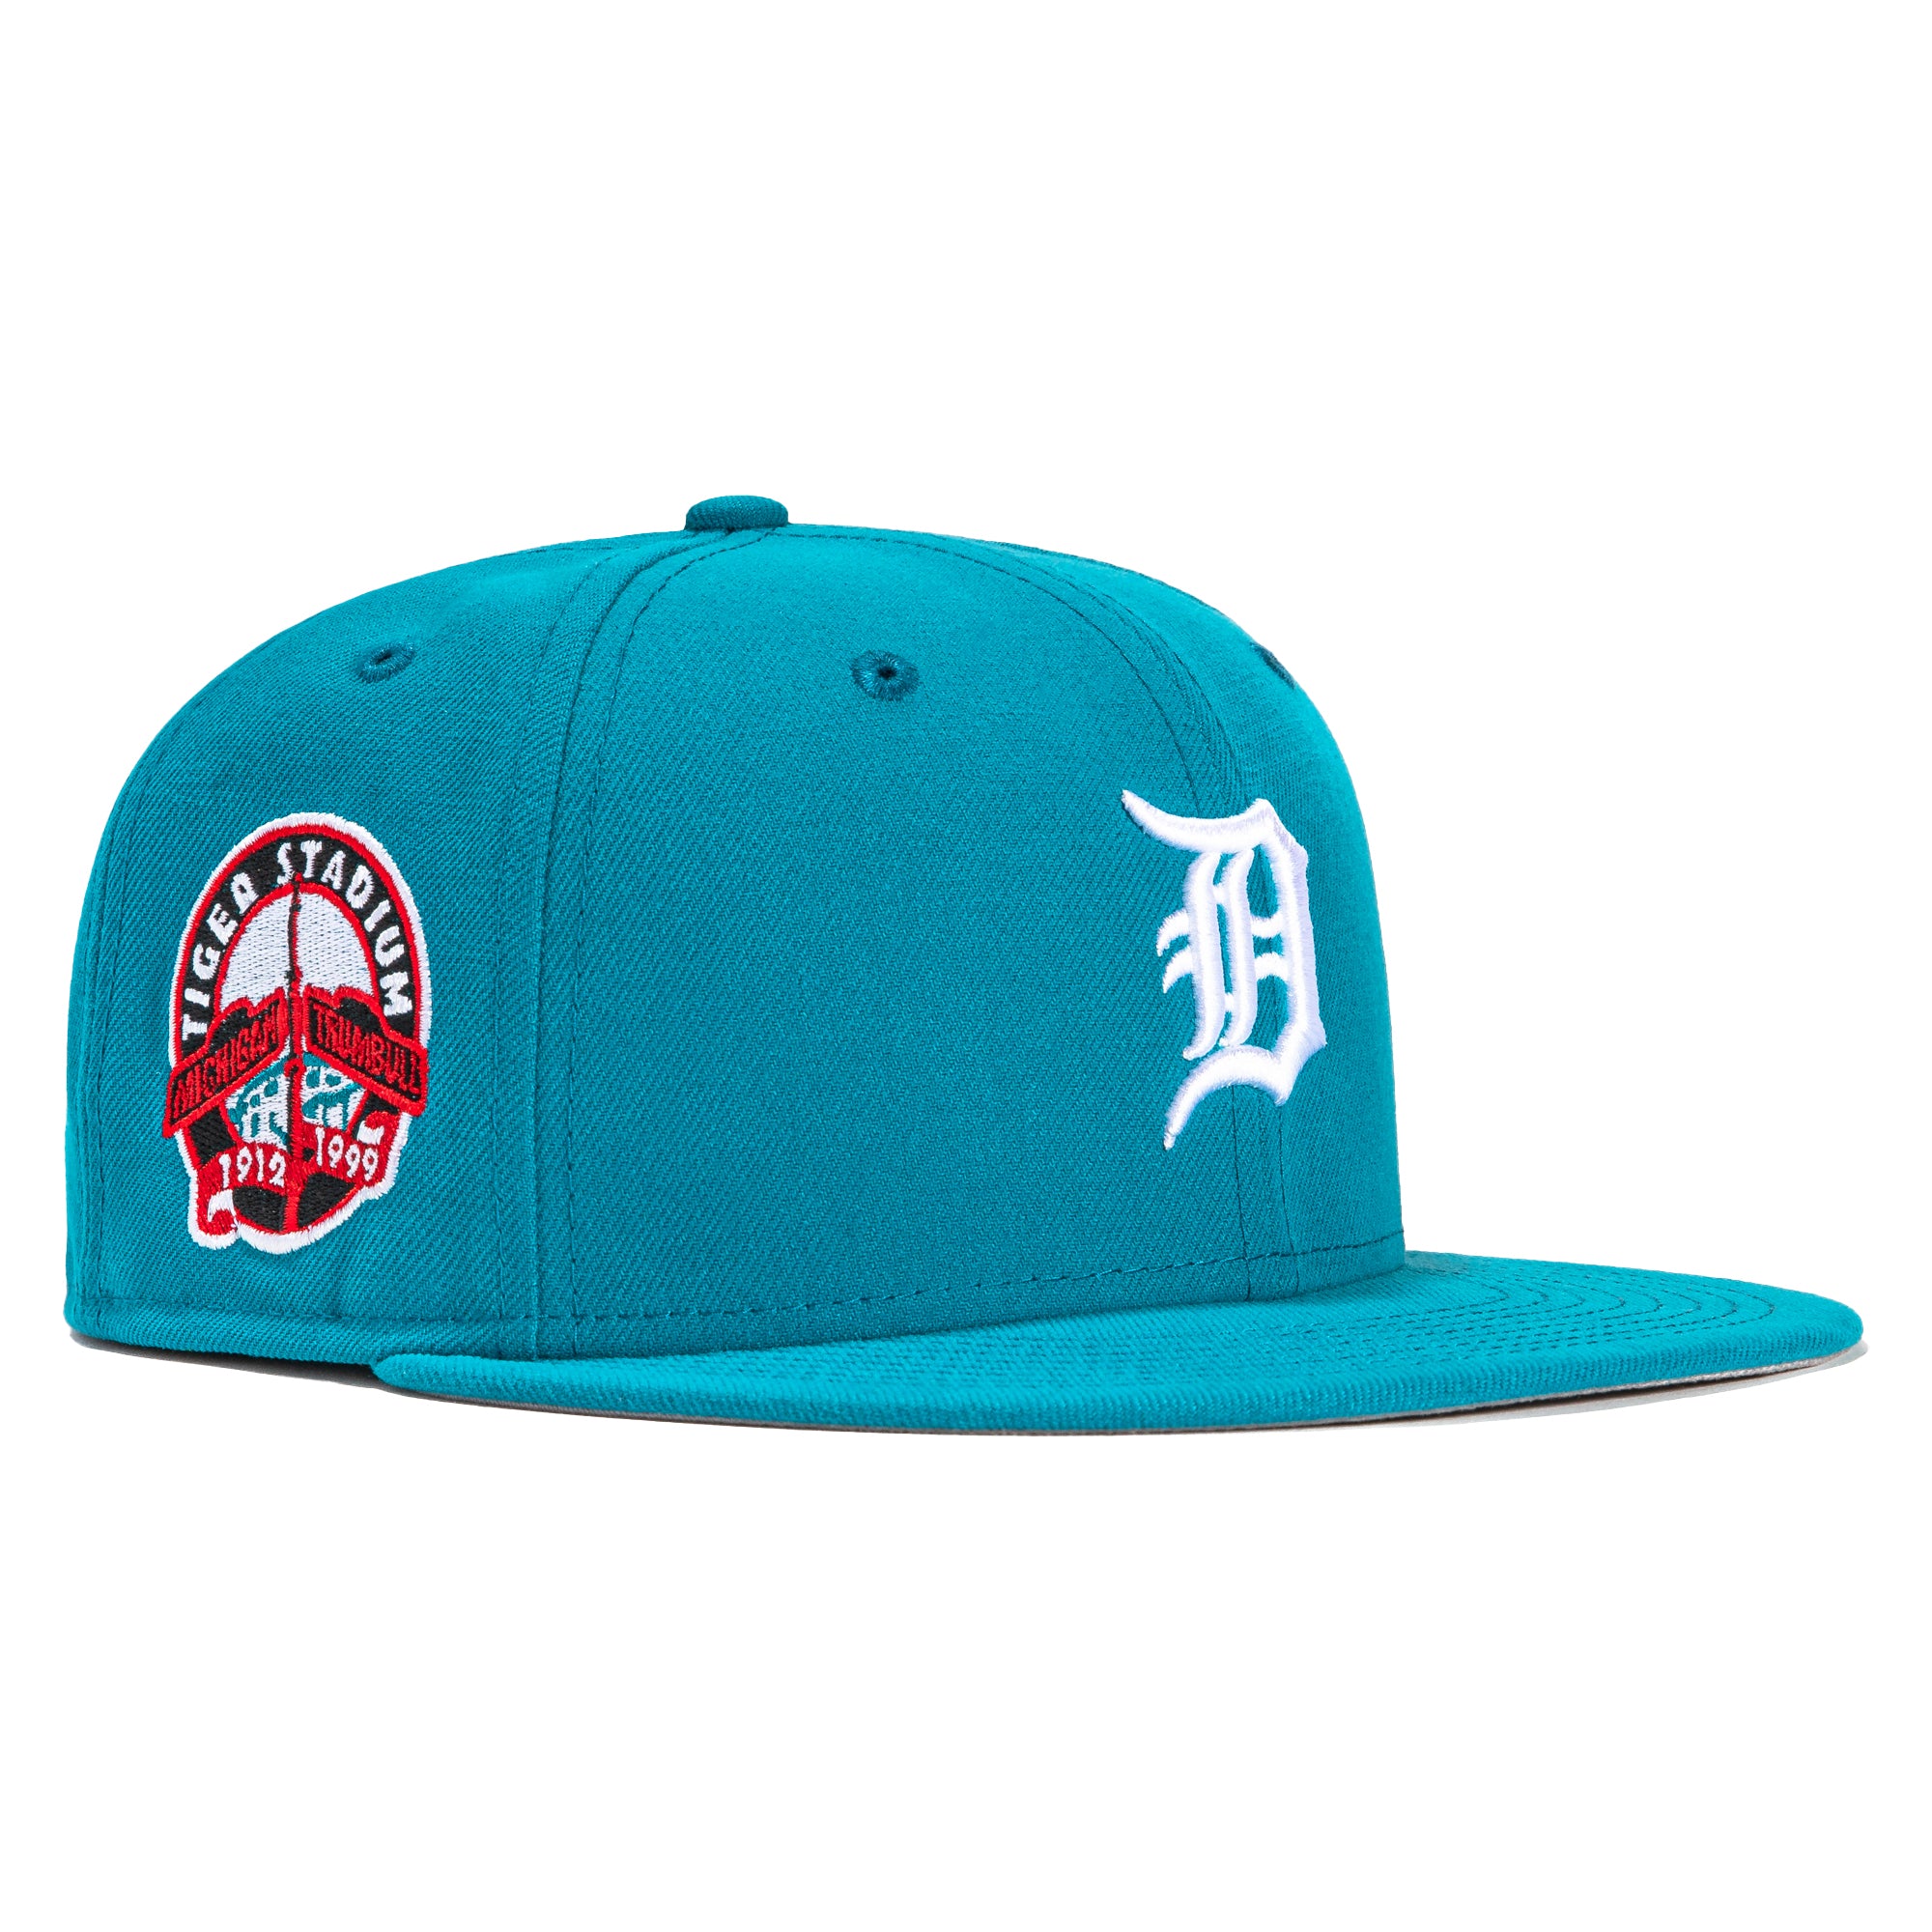 red white and blue detroit tigers hat